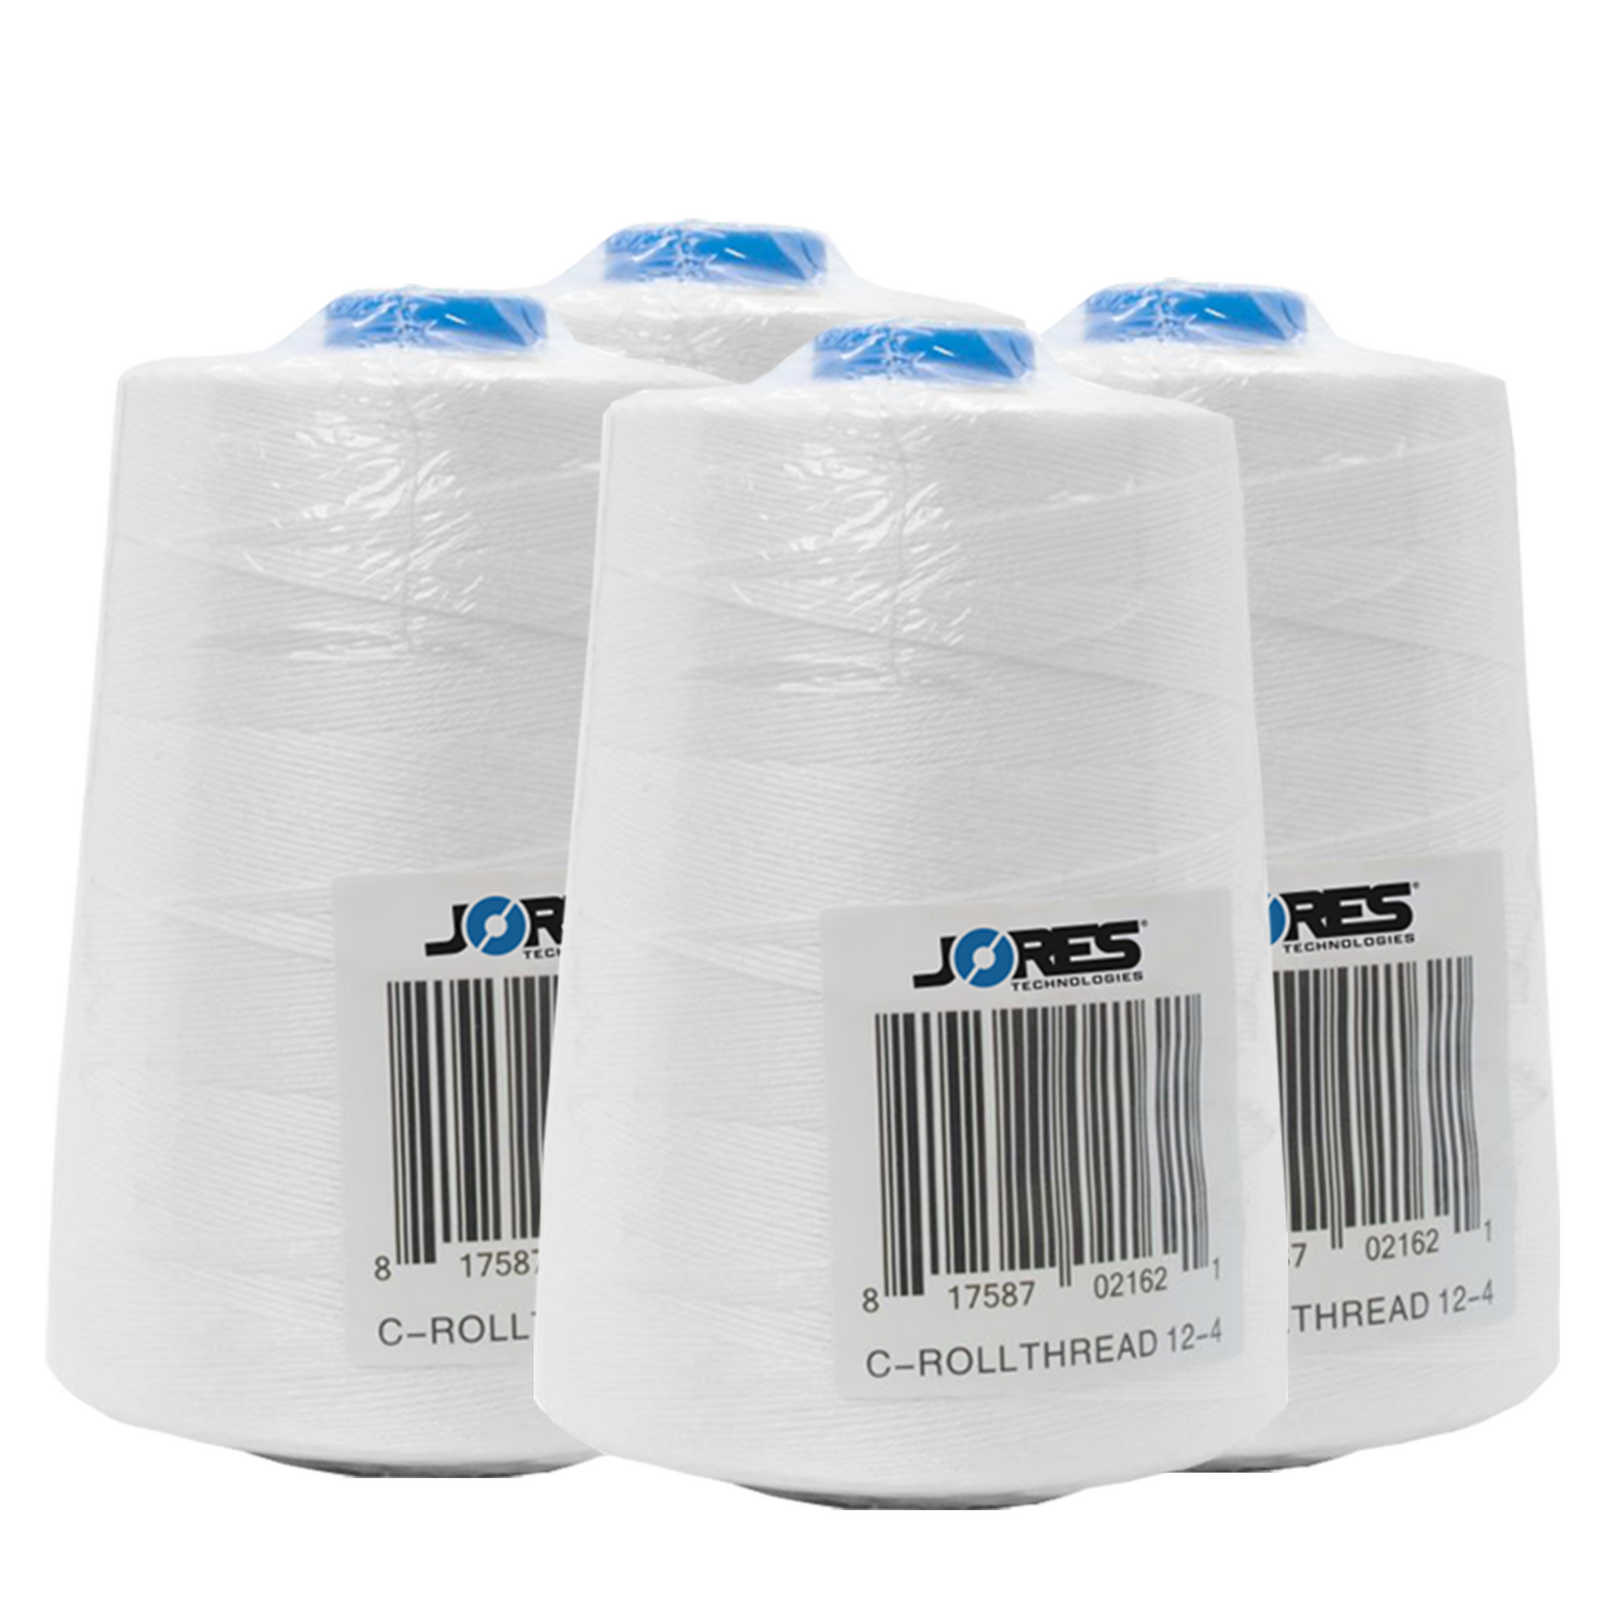 group of four white JORES TECHNOLOGIES® sewing thread spools wrapped in protective plastic for dirt protection